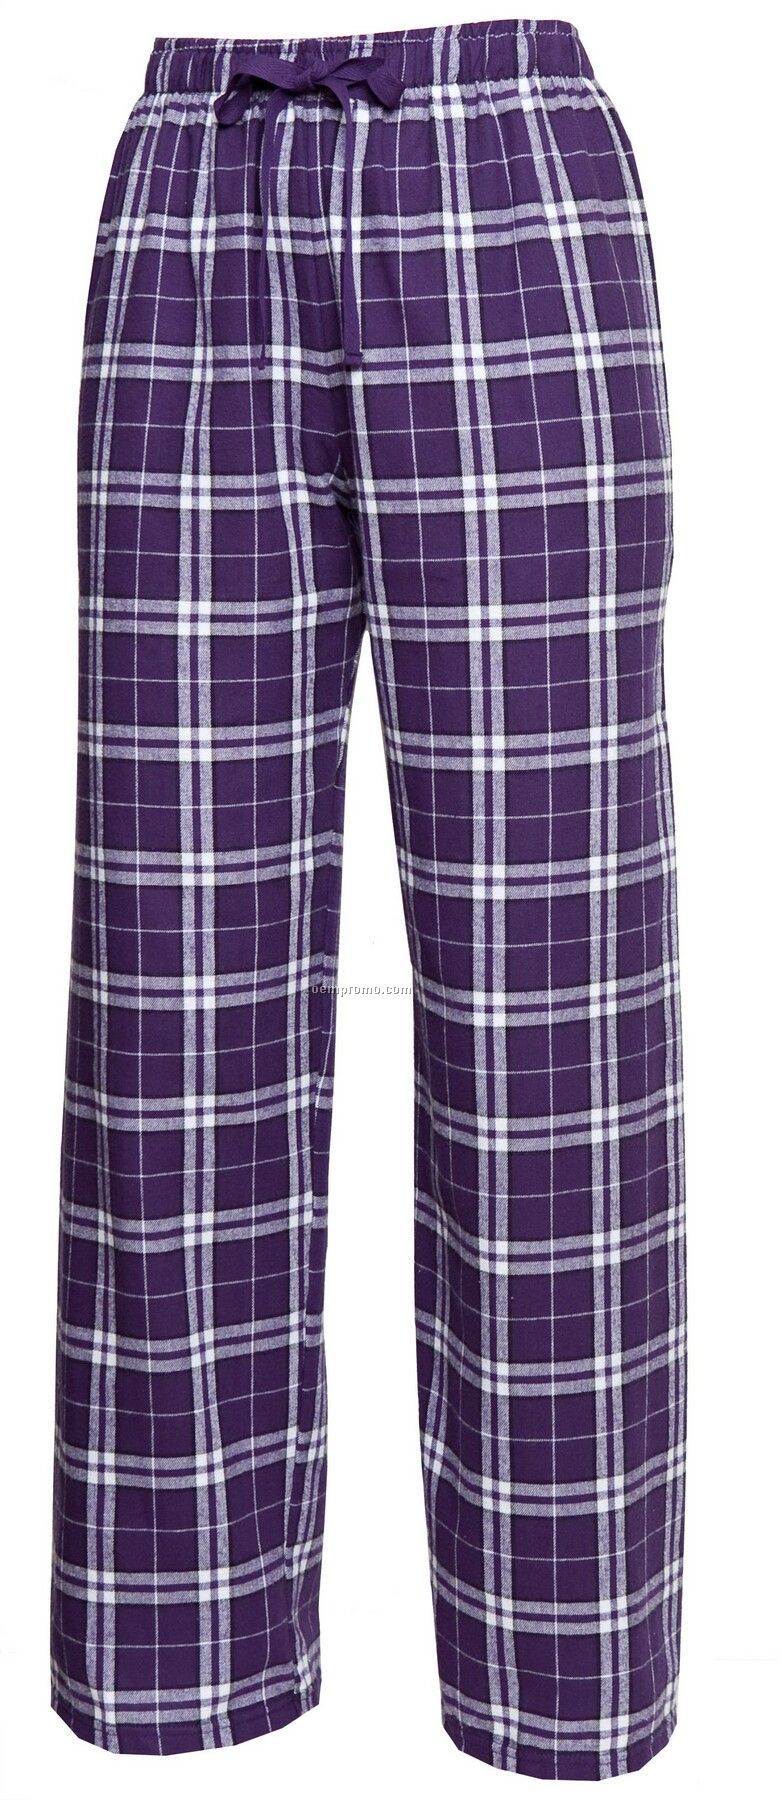 Youth Team Pride Flannel Pant In Purple & White Plaid